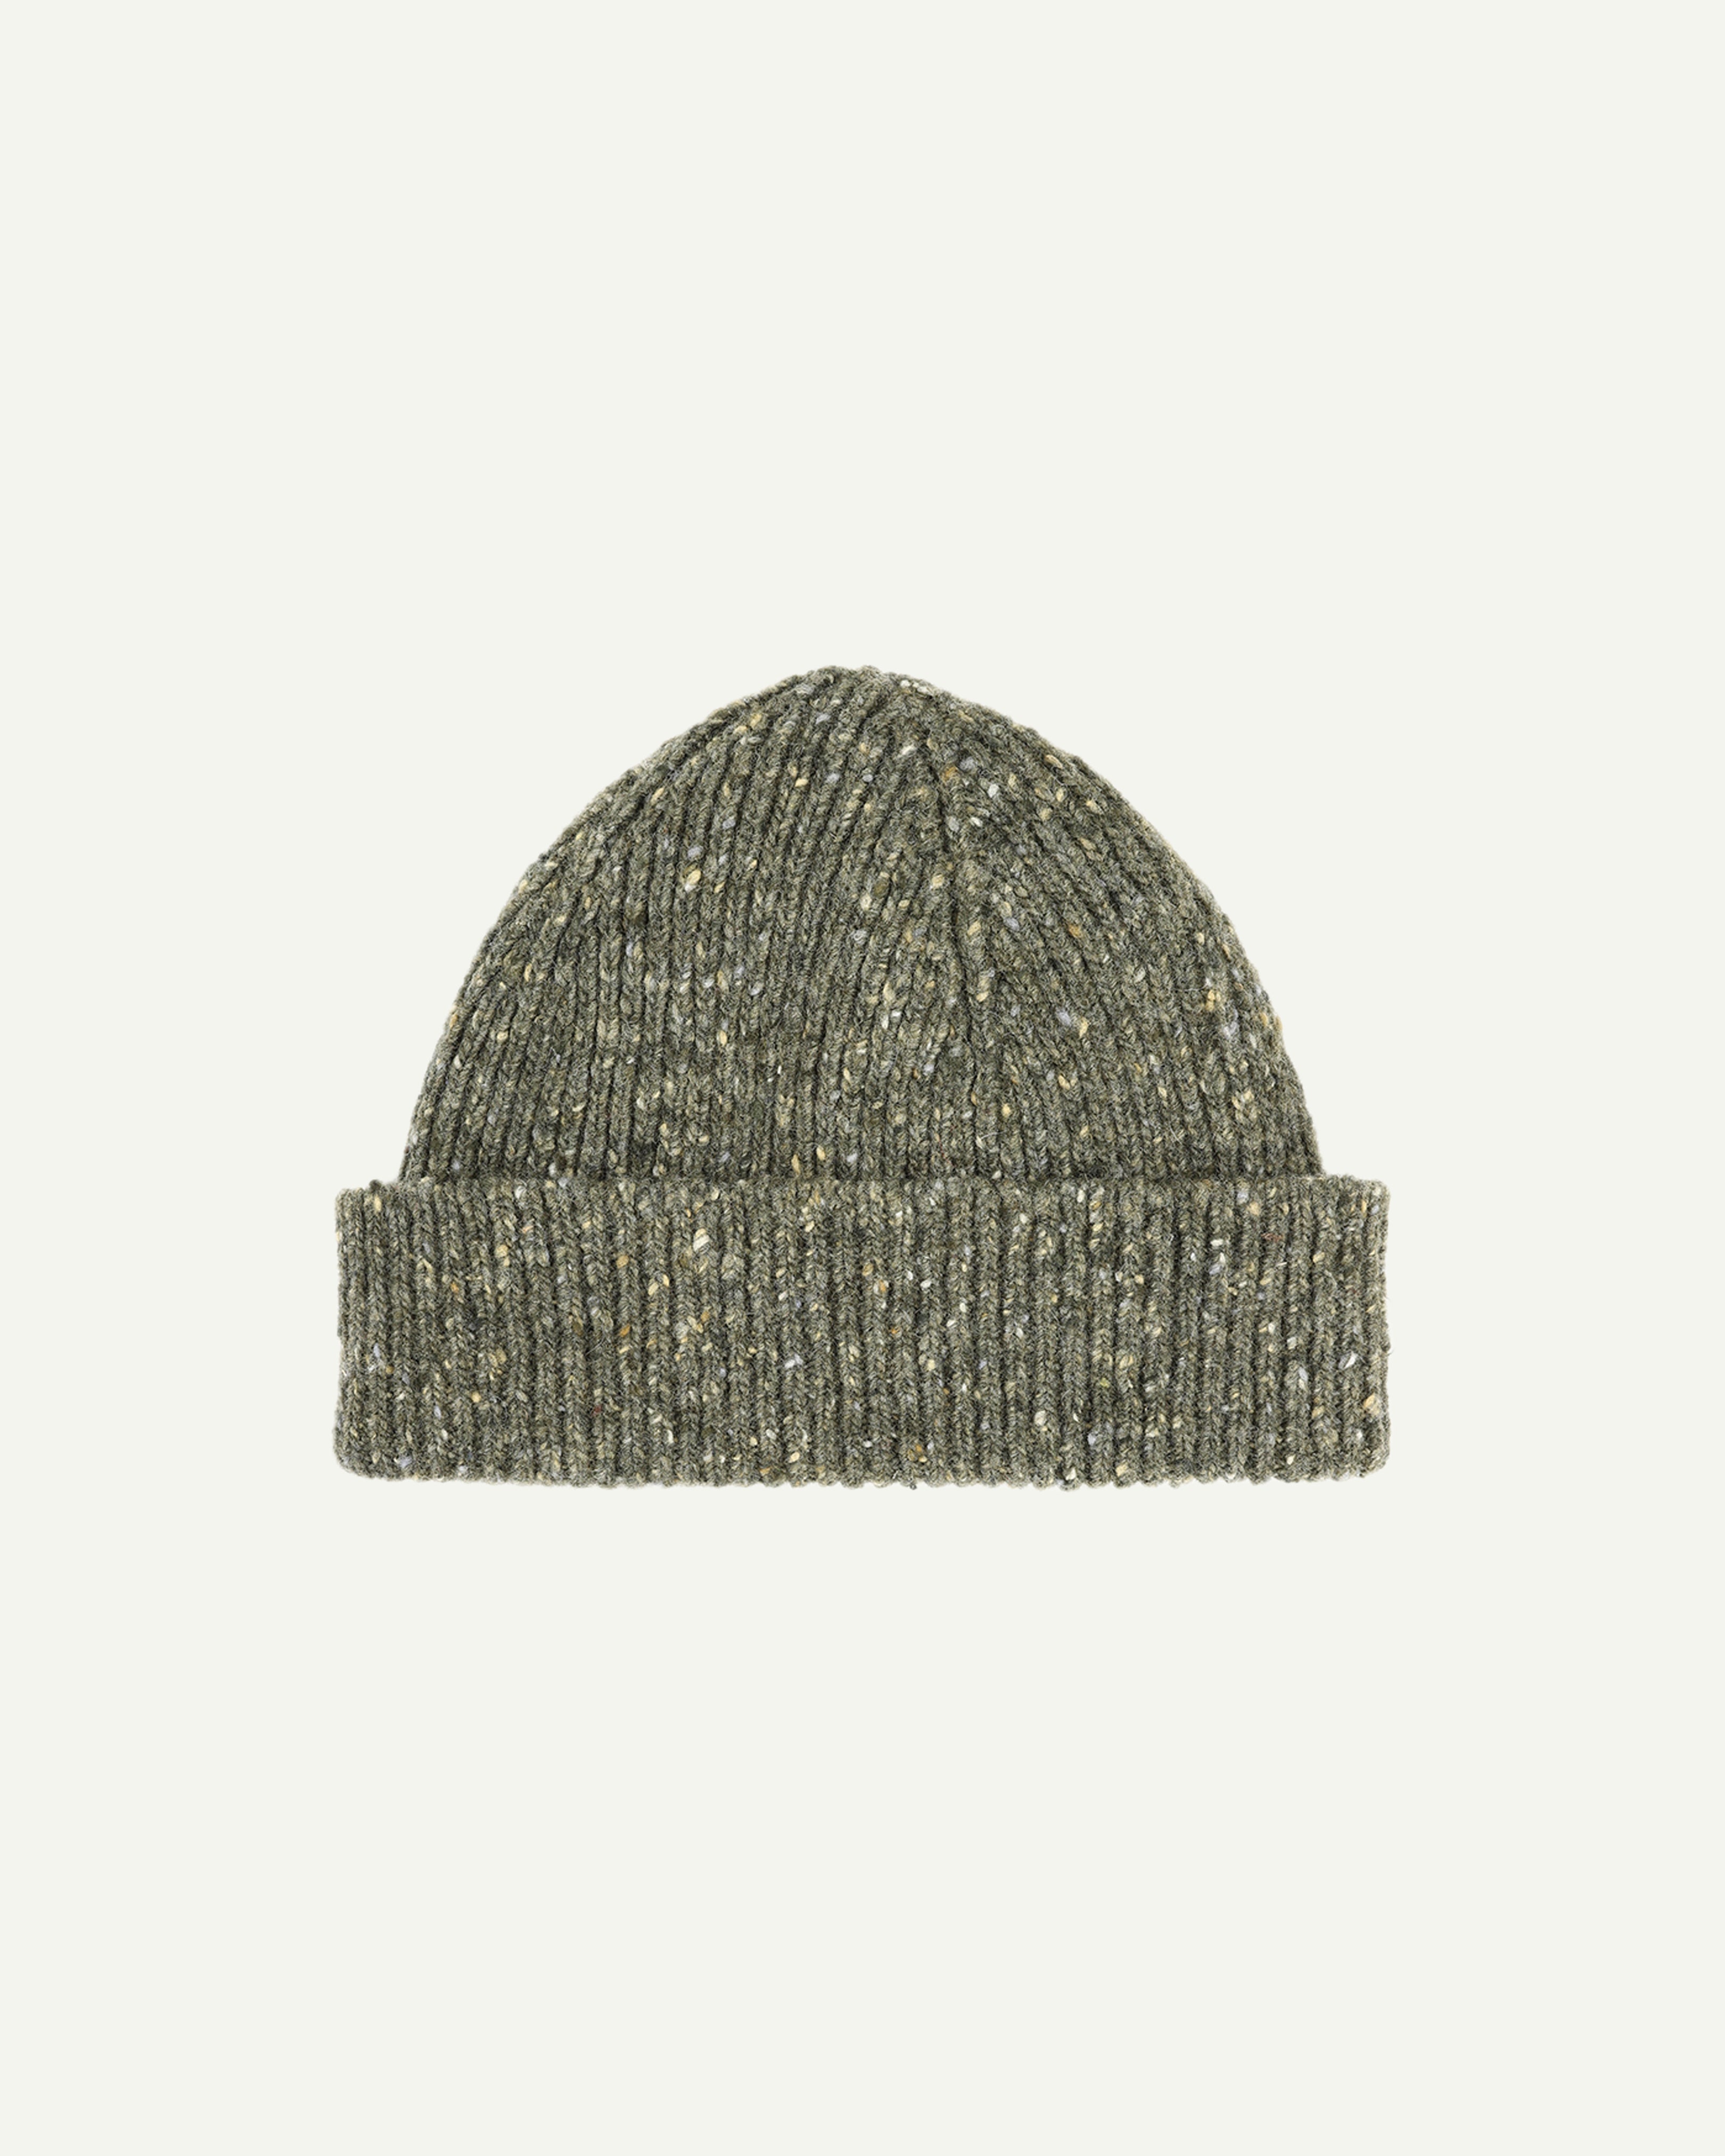  Flat view of Uskees 4003 donegal wool hat in army green, with a clear view of the adjustable cuff.